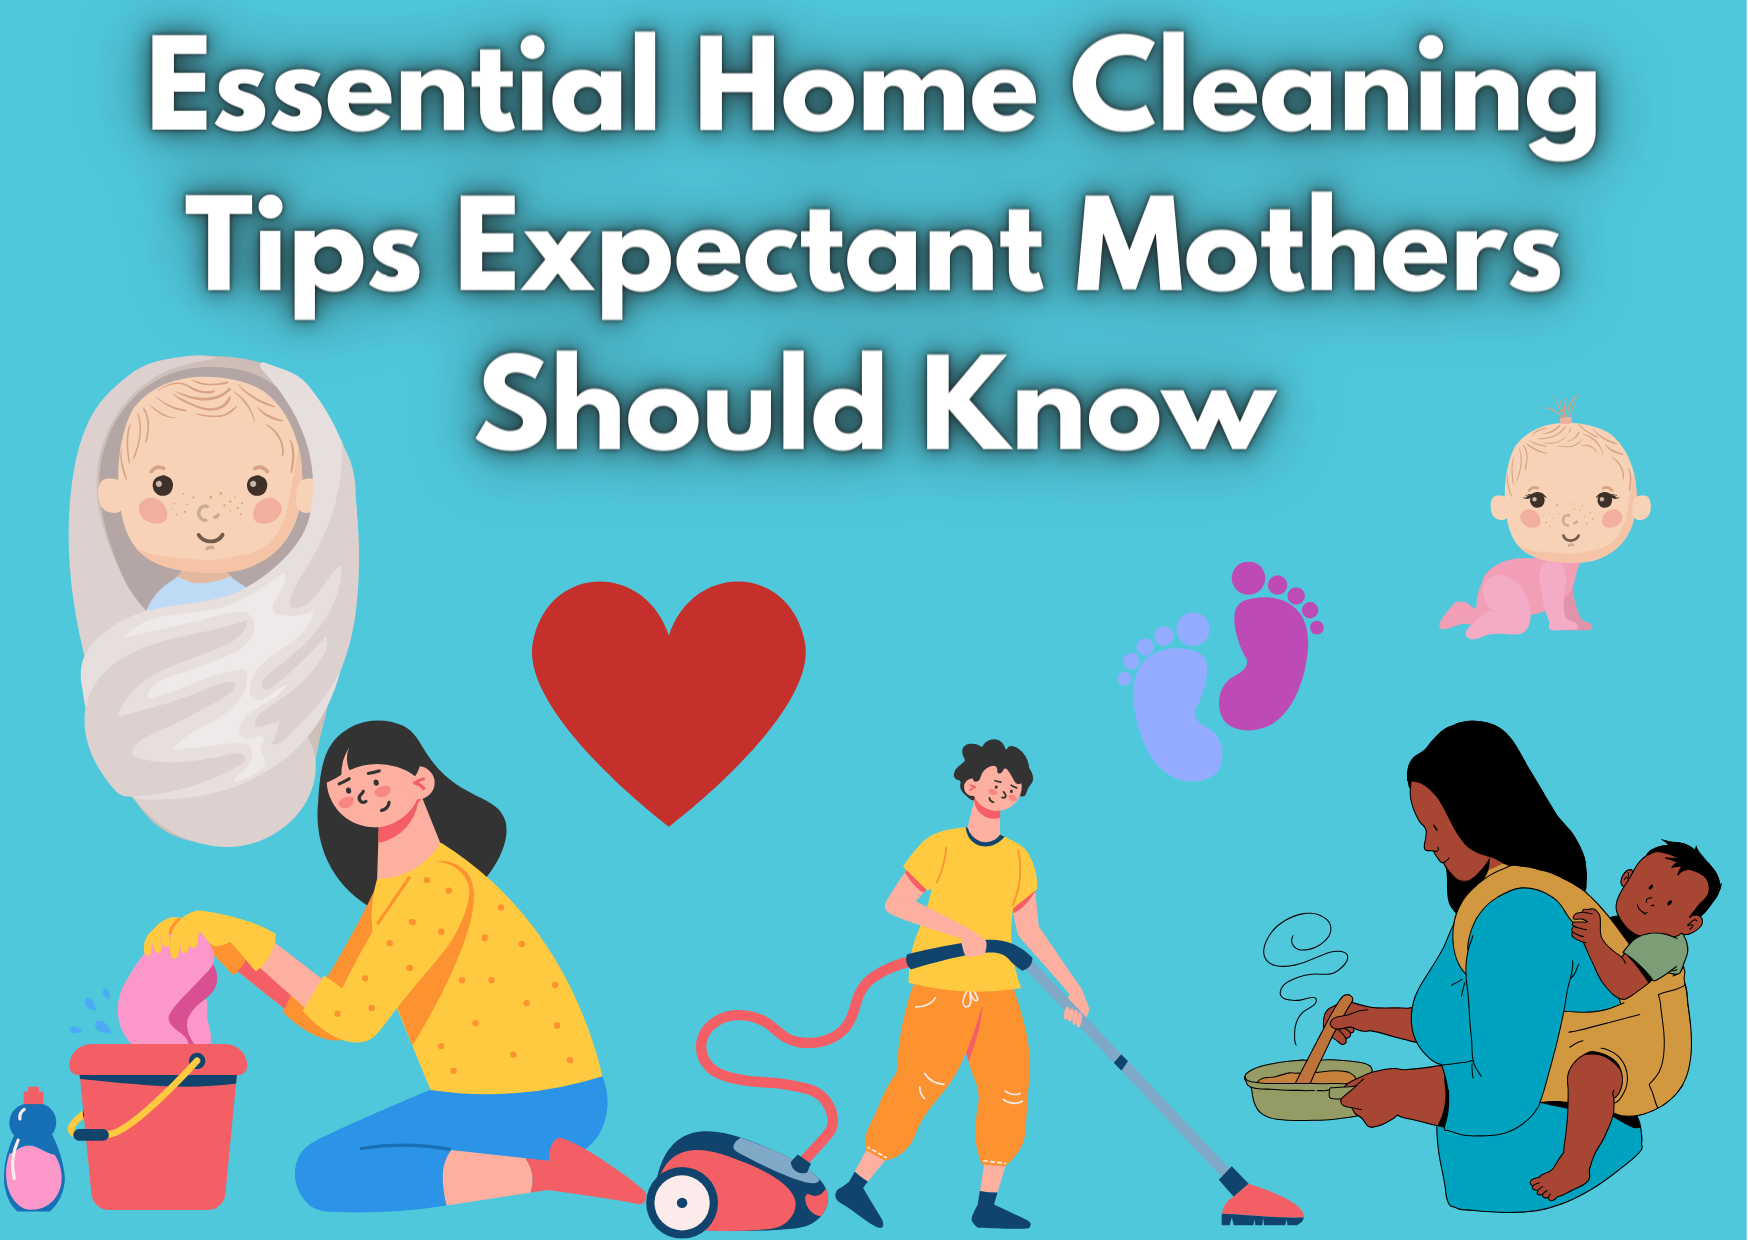 Essential Home Cleaning Tips Expectant Mothers Should Know